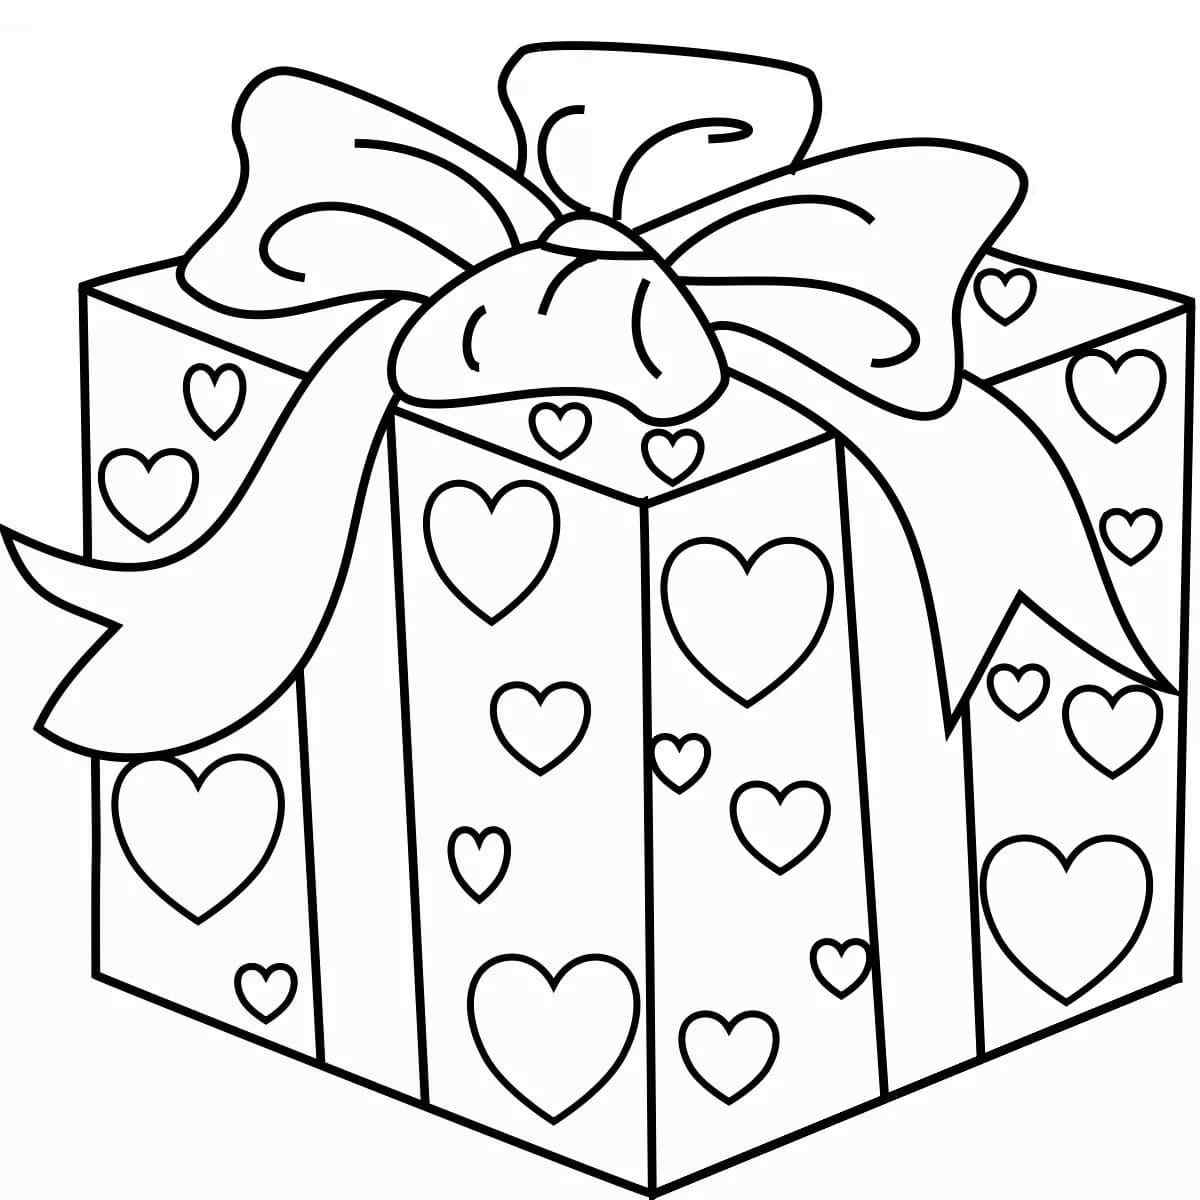 Gift Wrapping Boxes In Hearts Coloring Page